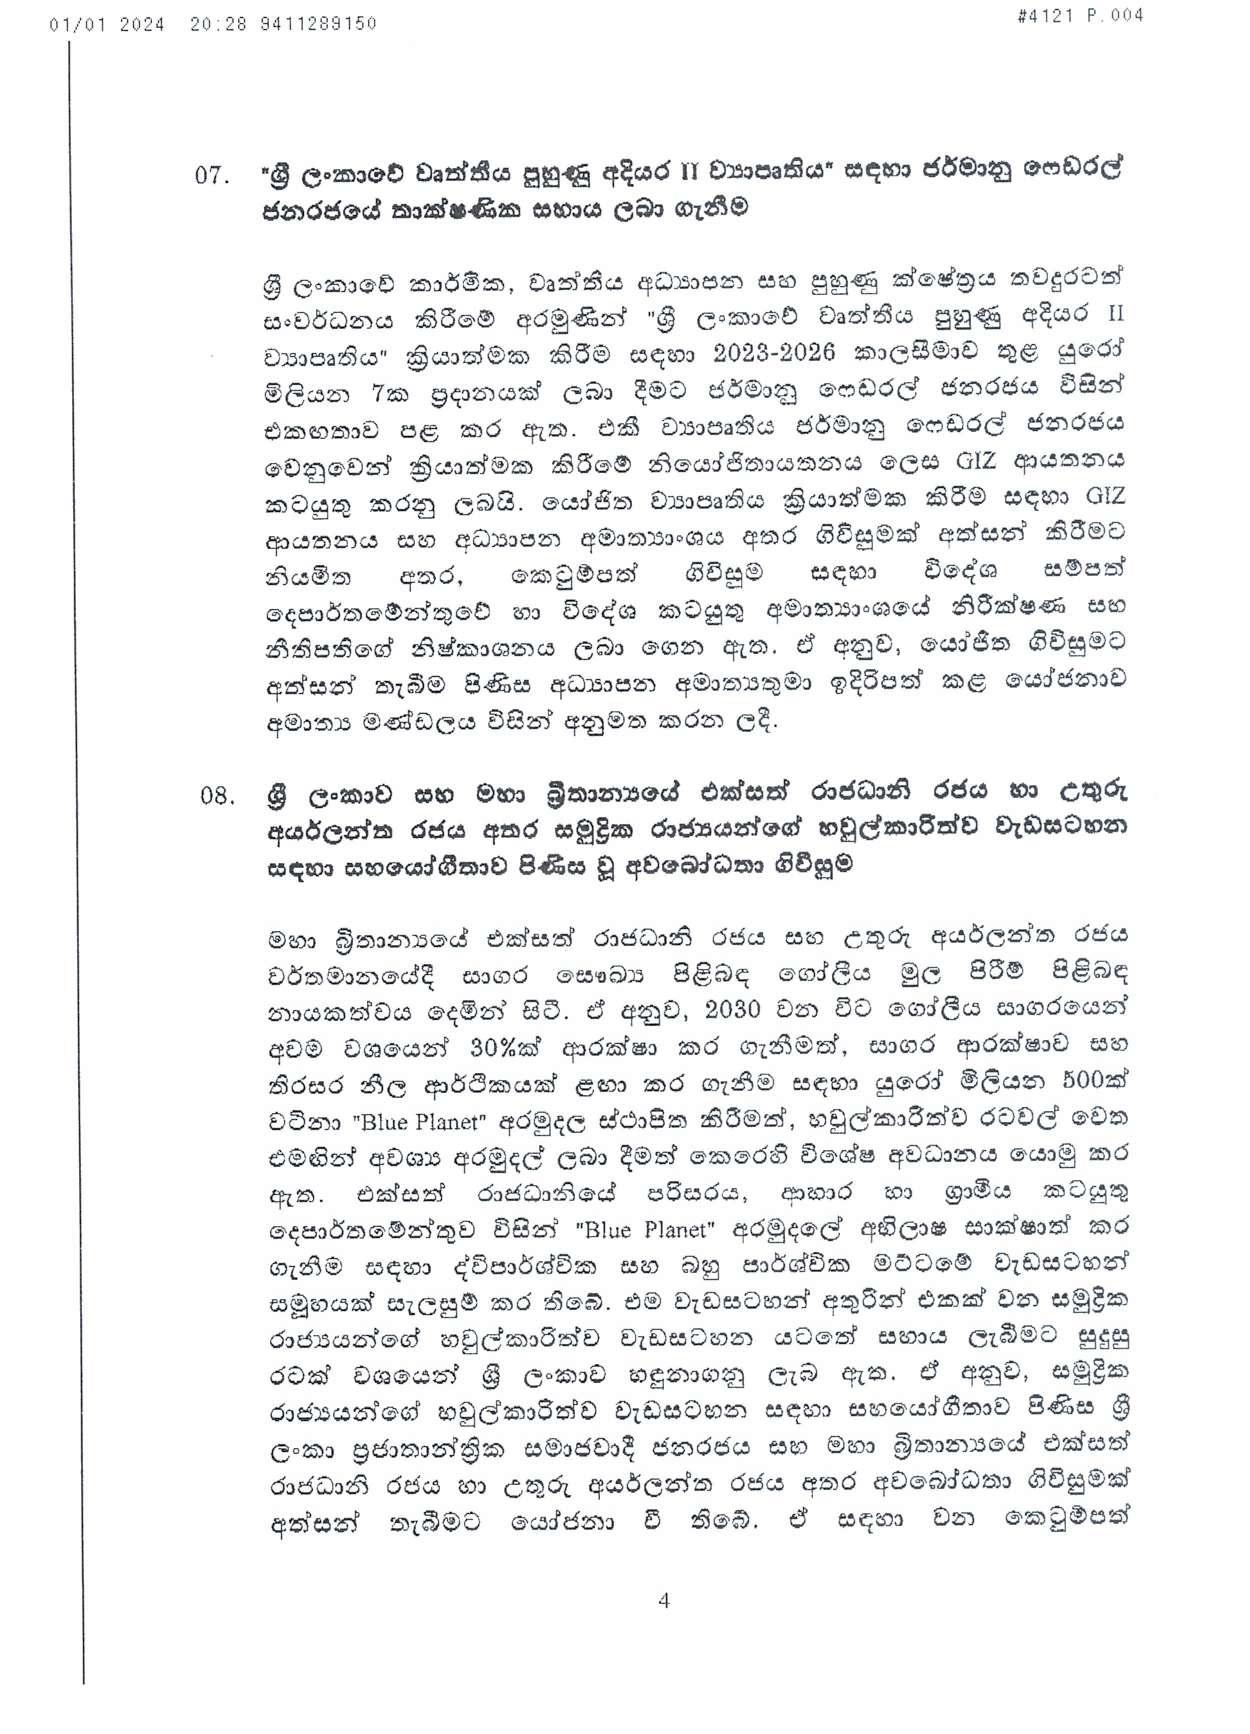 Cabinet Decision on 01.01.2024 page 004